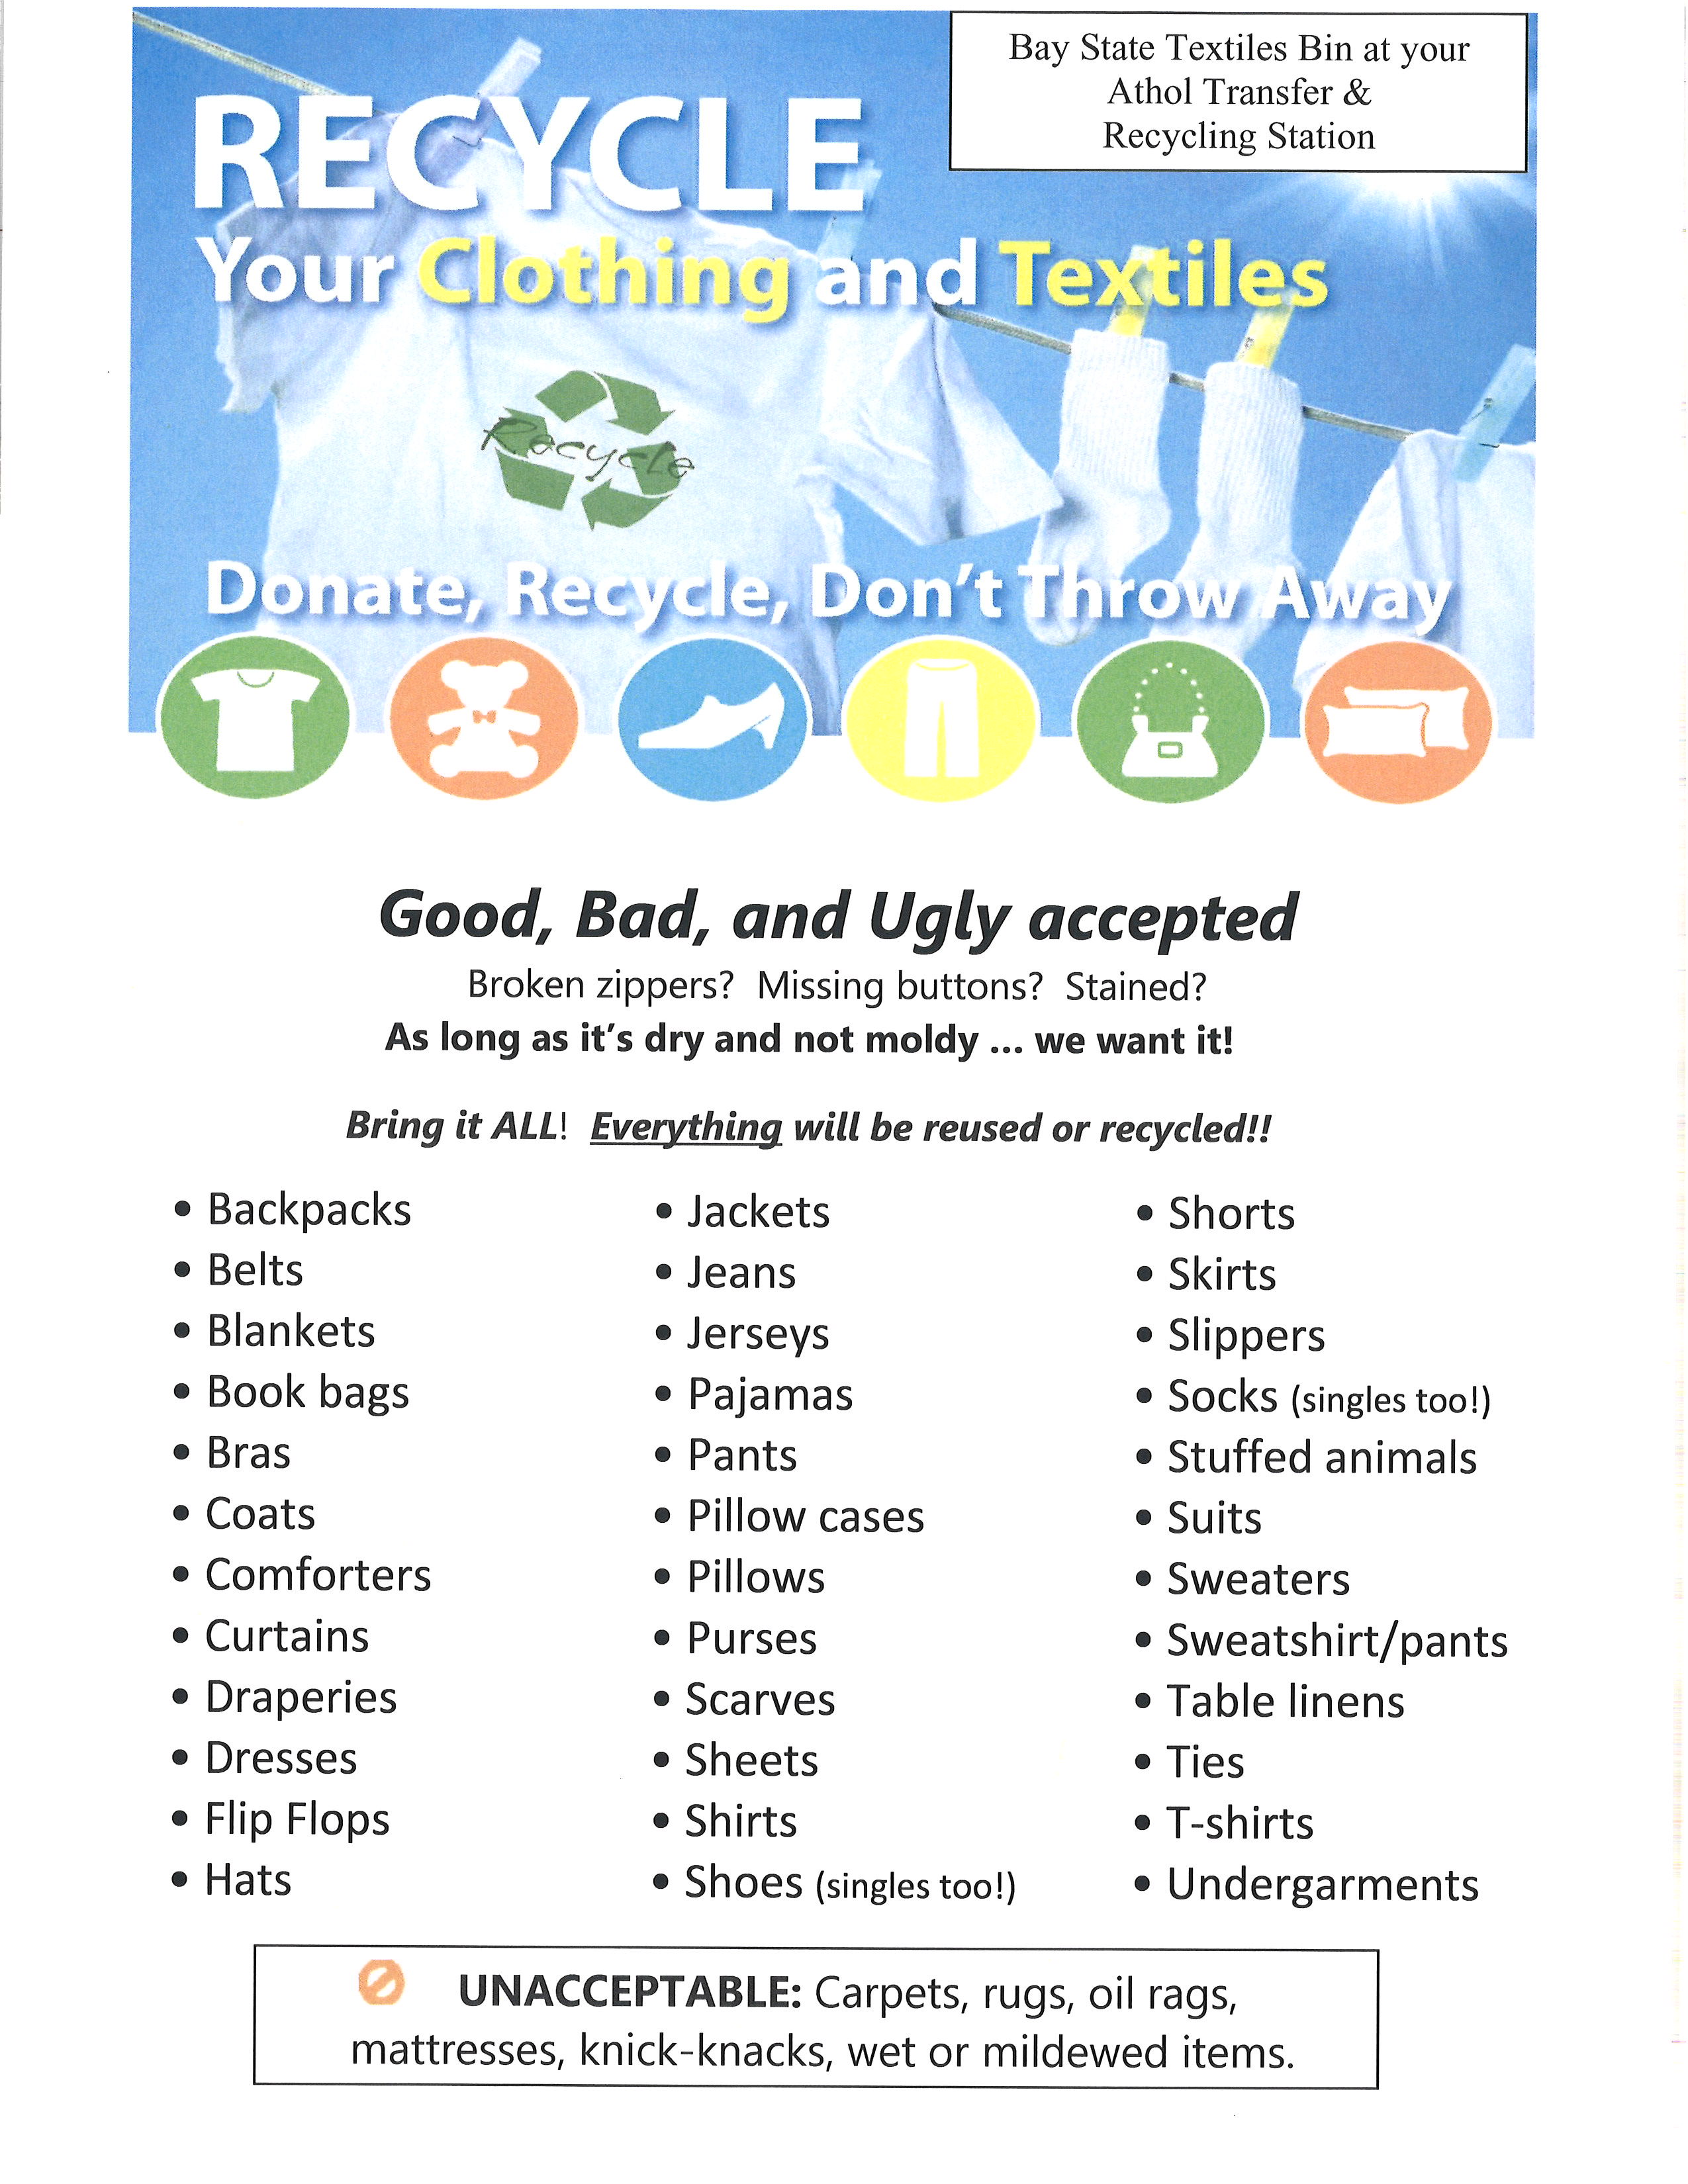 List of acceptable items for recycling your clothes and textiles